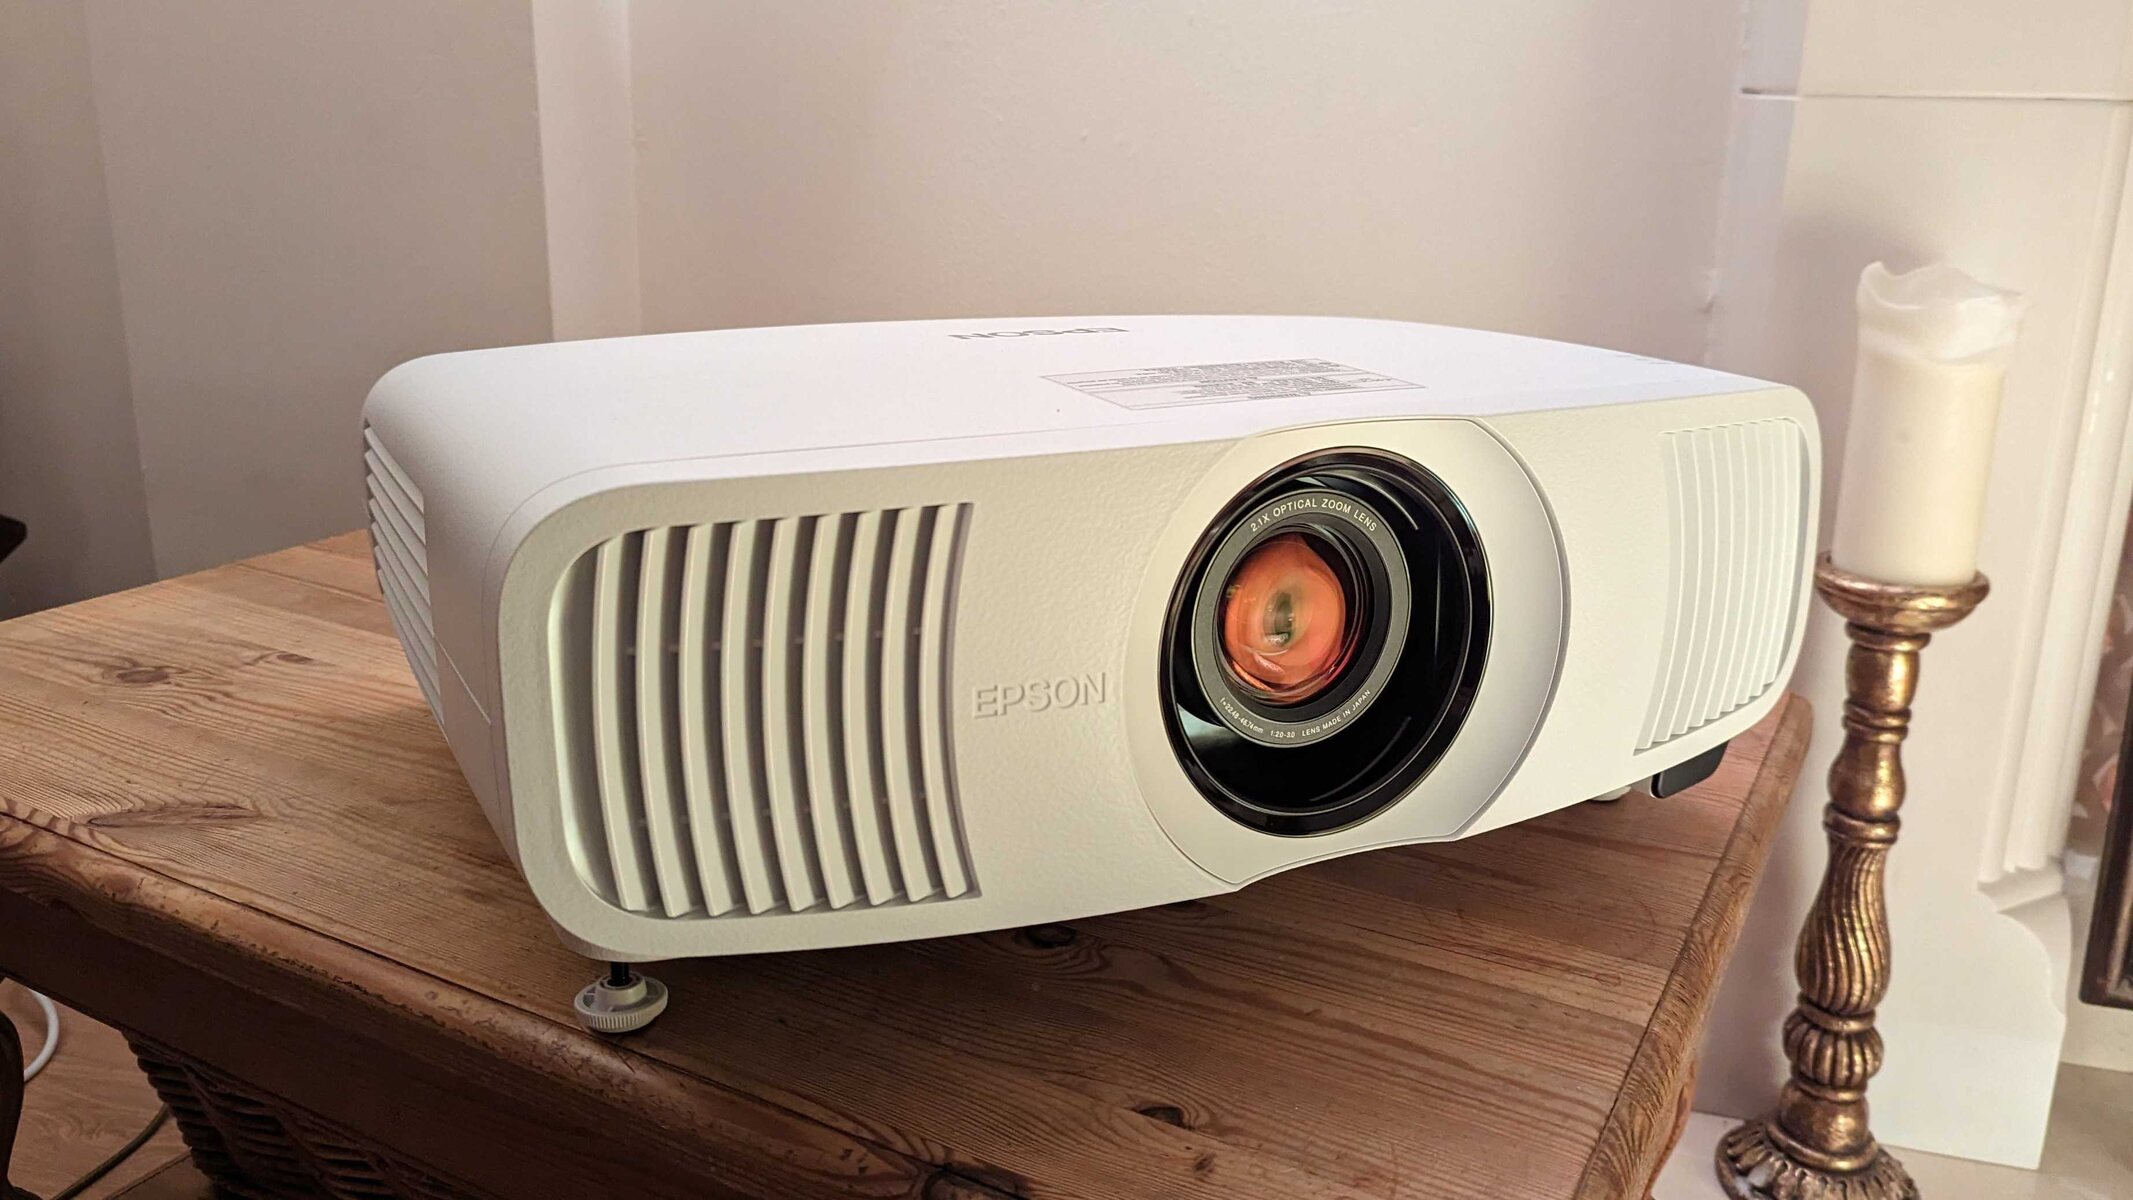 How To Zoom Out On Projector